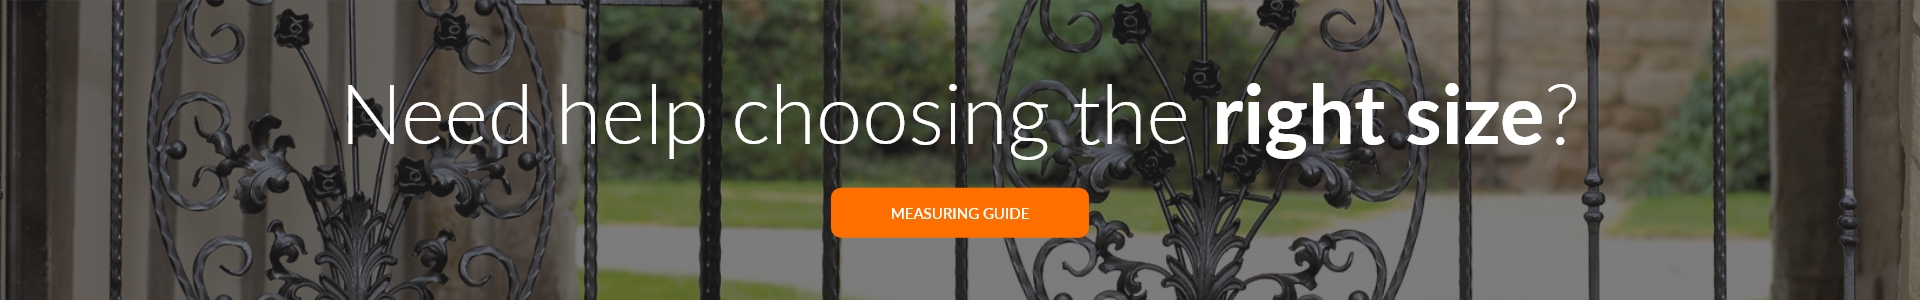 View the measuring guide for help selecting the right gate size